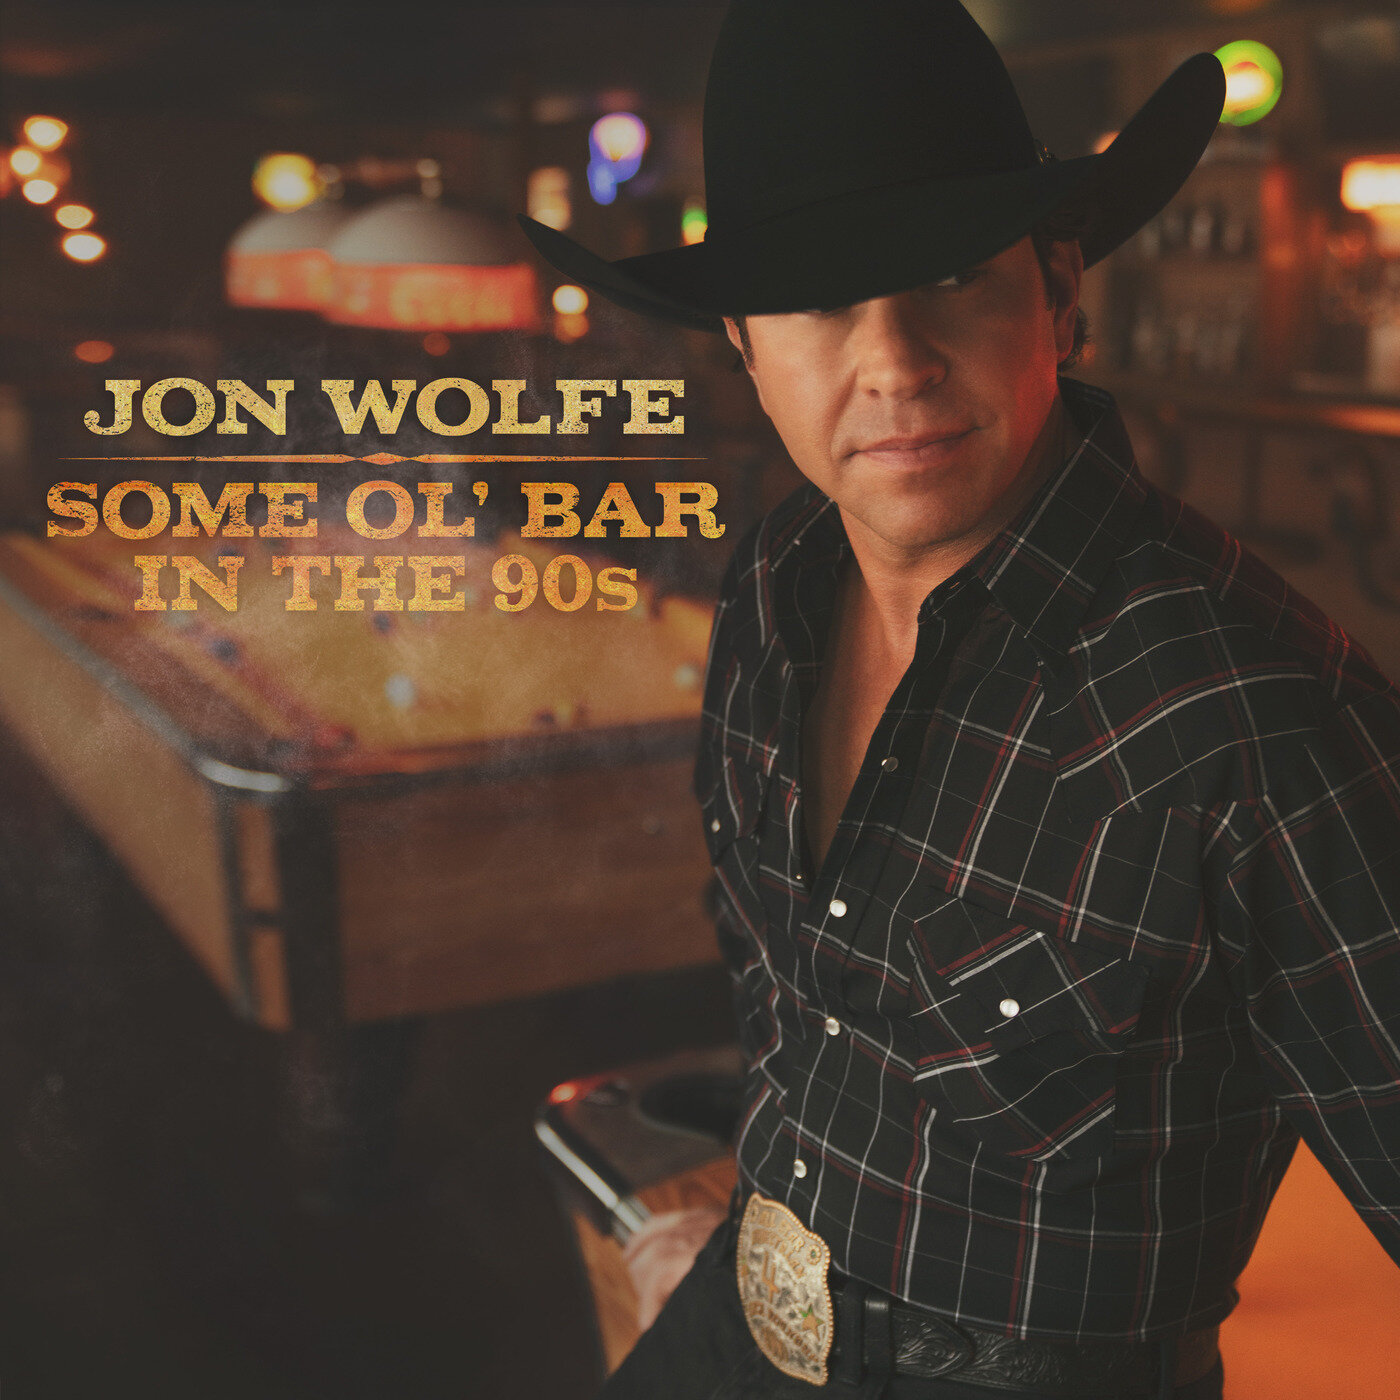 Jon Wolfe "Some Old Bar in the Nineties"